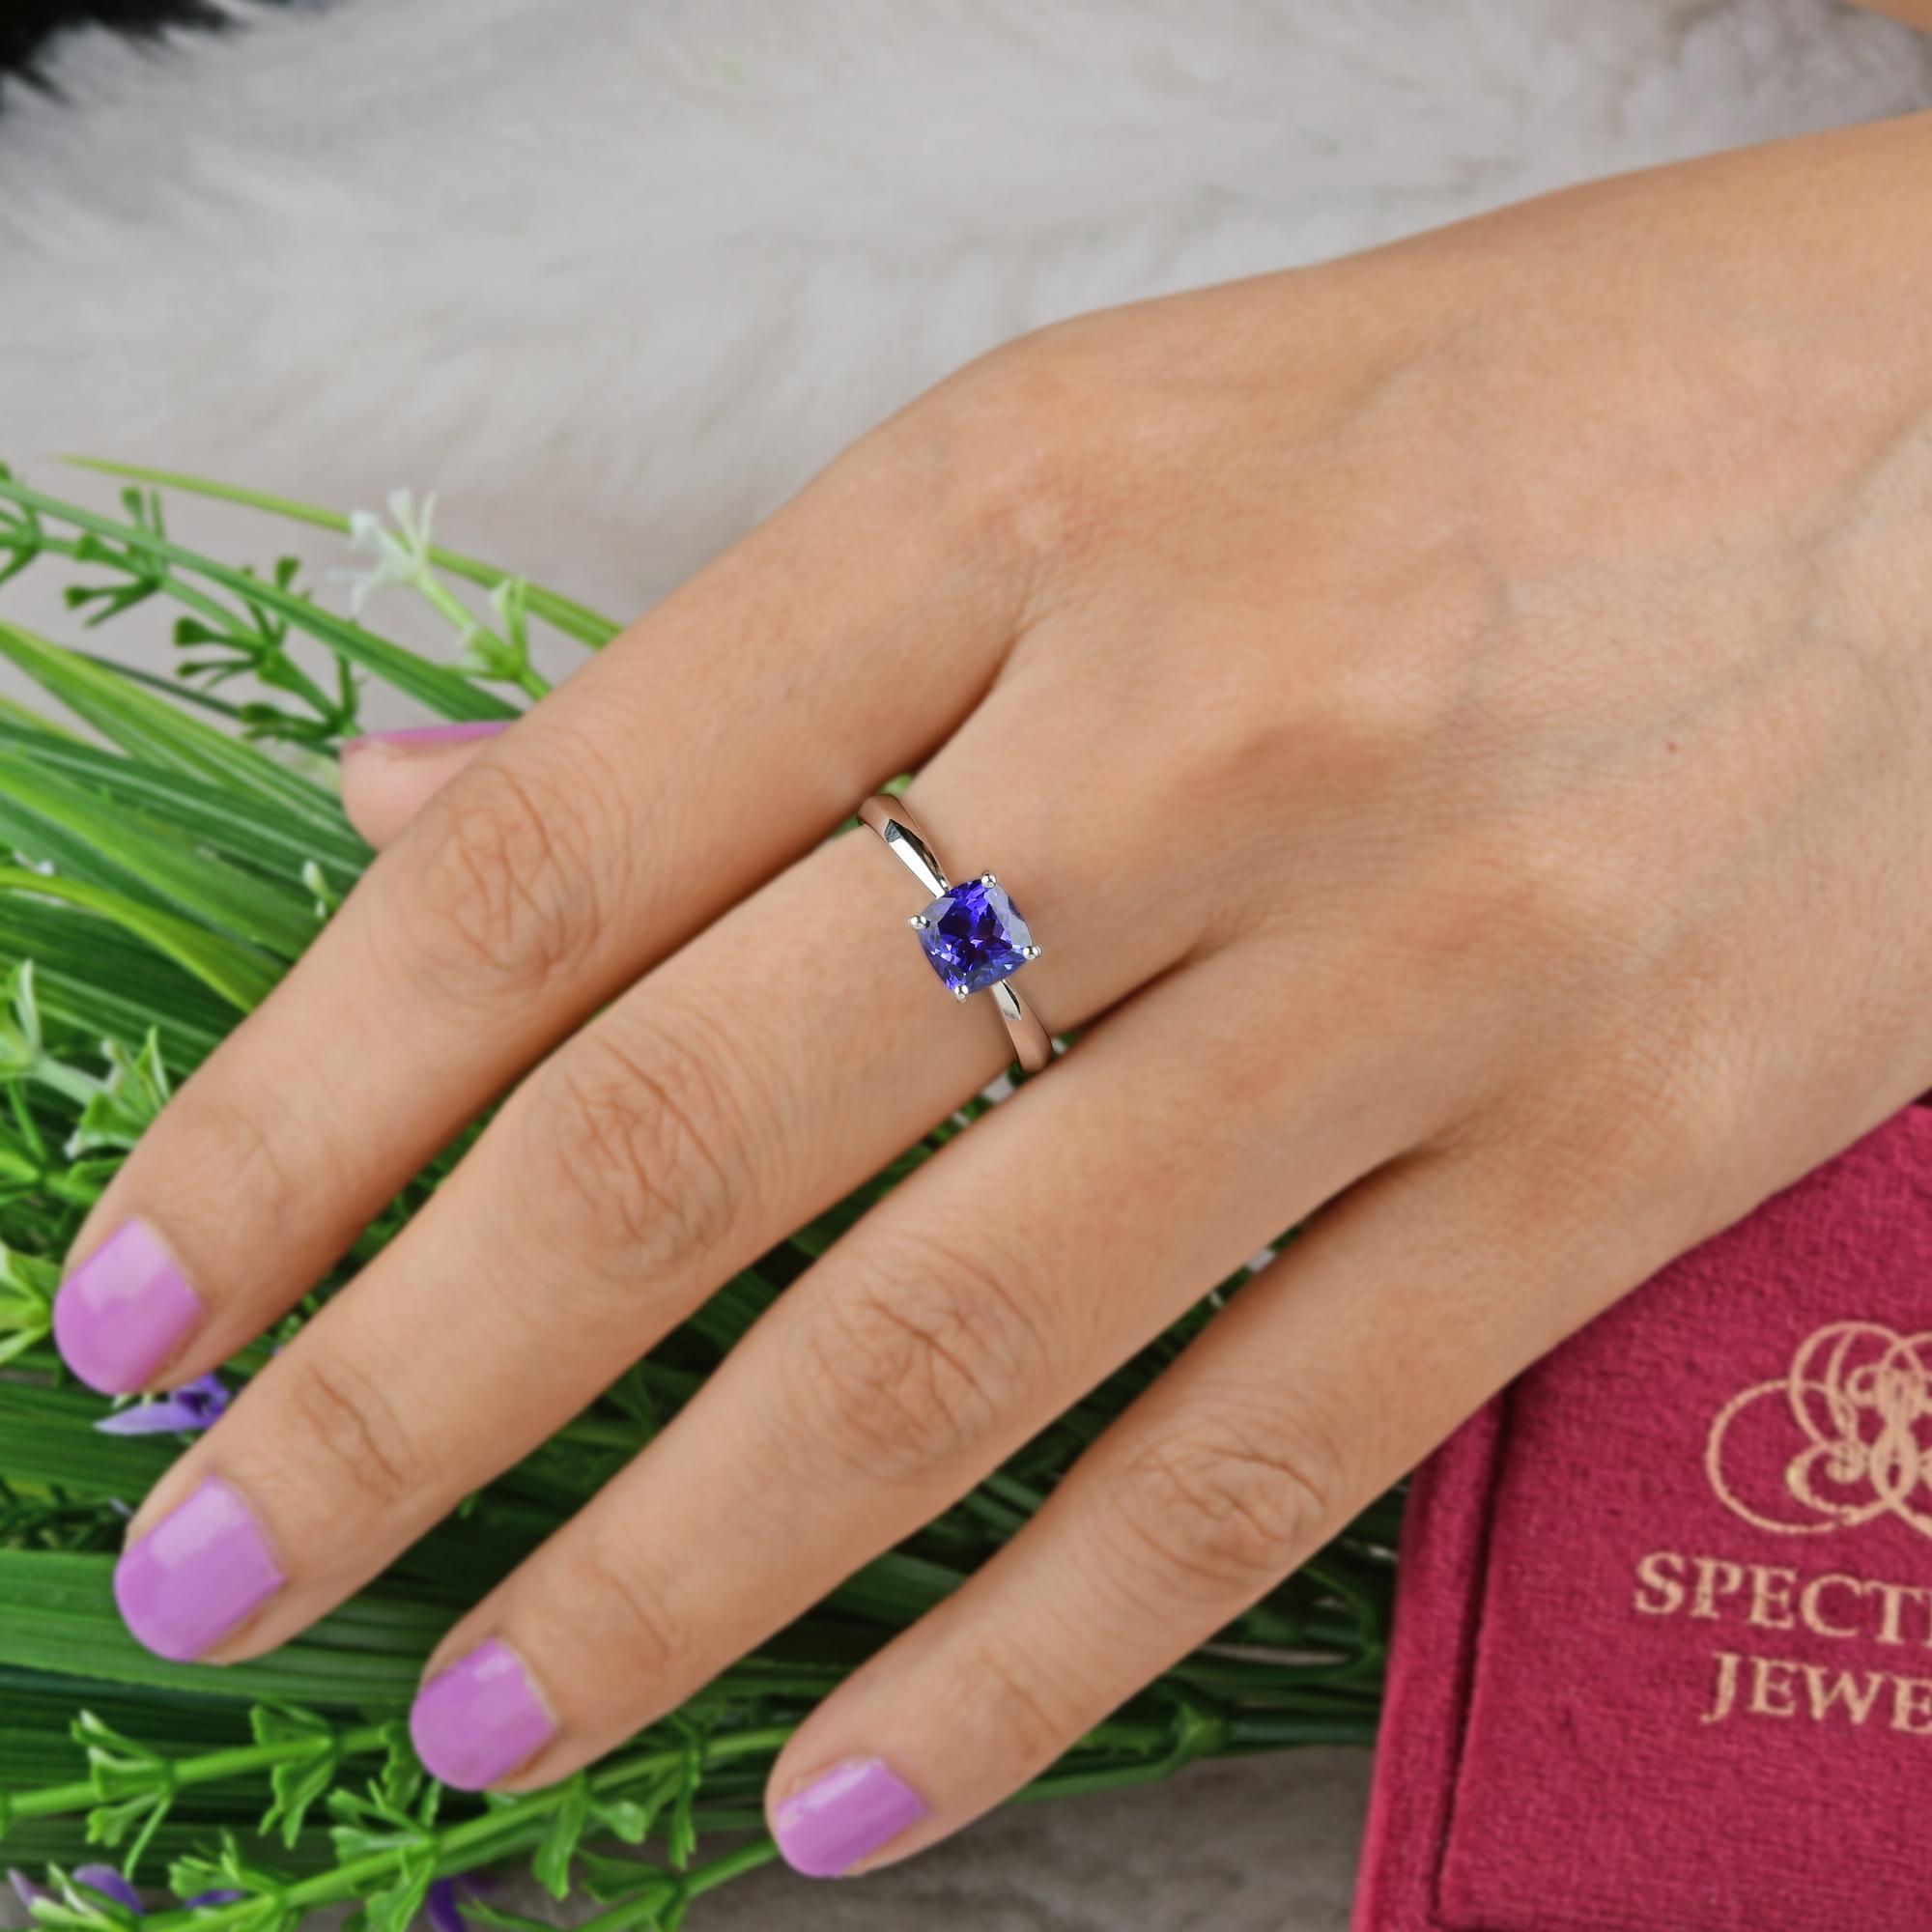 Taille coussin 1.67 Carat Solitaire Cushion Tanzanite Ring 18 Solid Karat White Gold Jewelry en vente